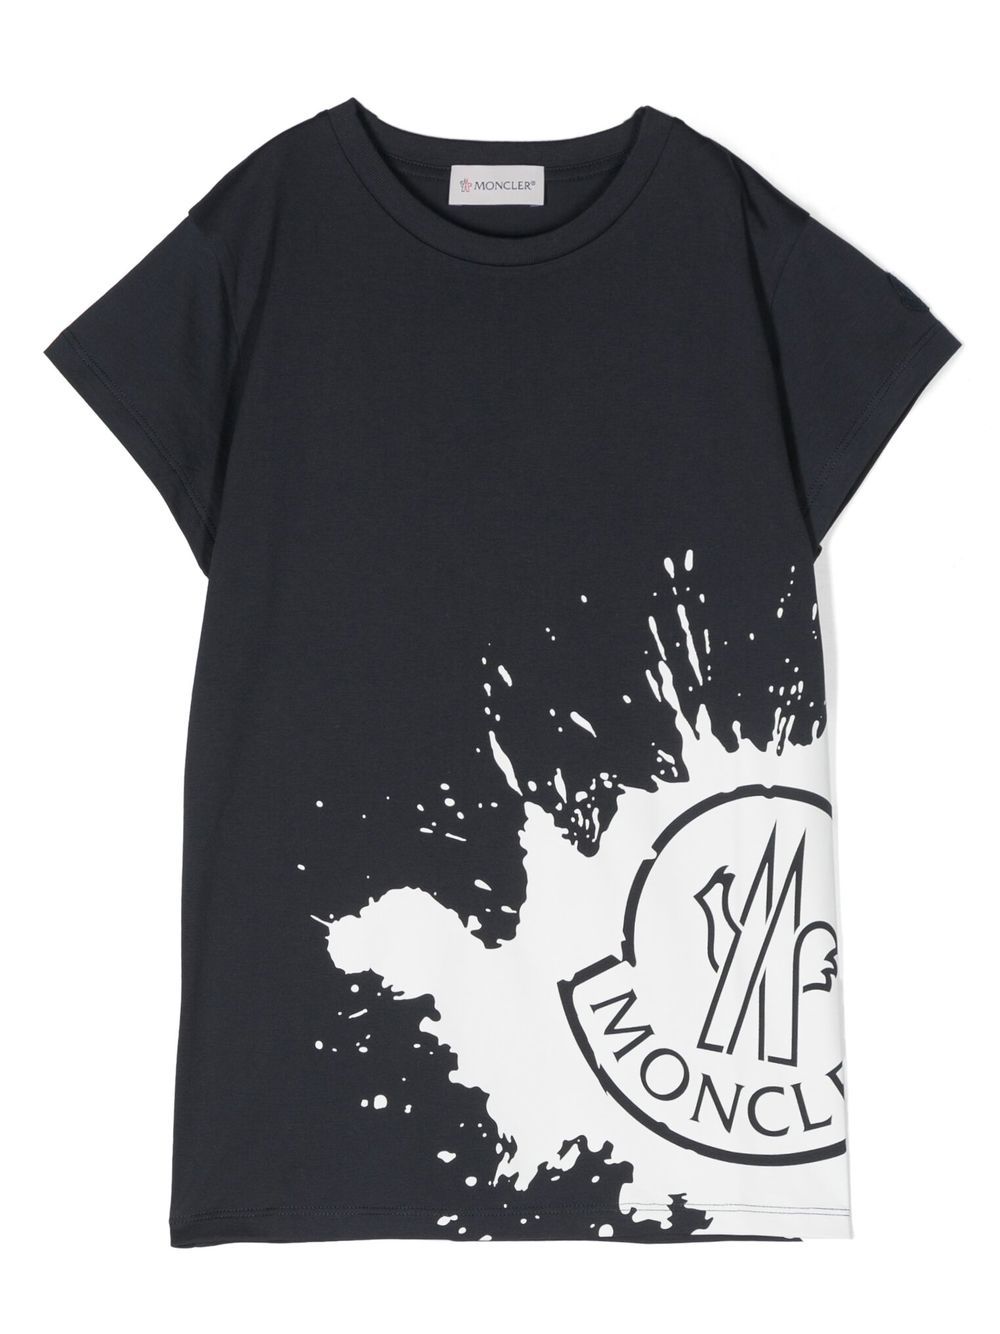 Blue t-shirt for girls with logo